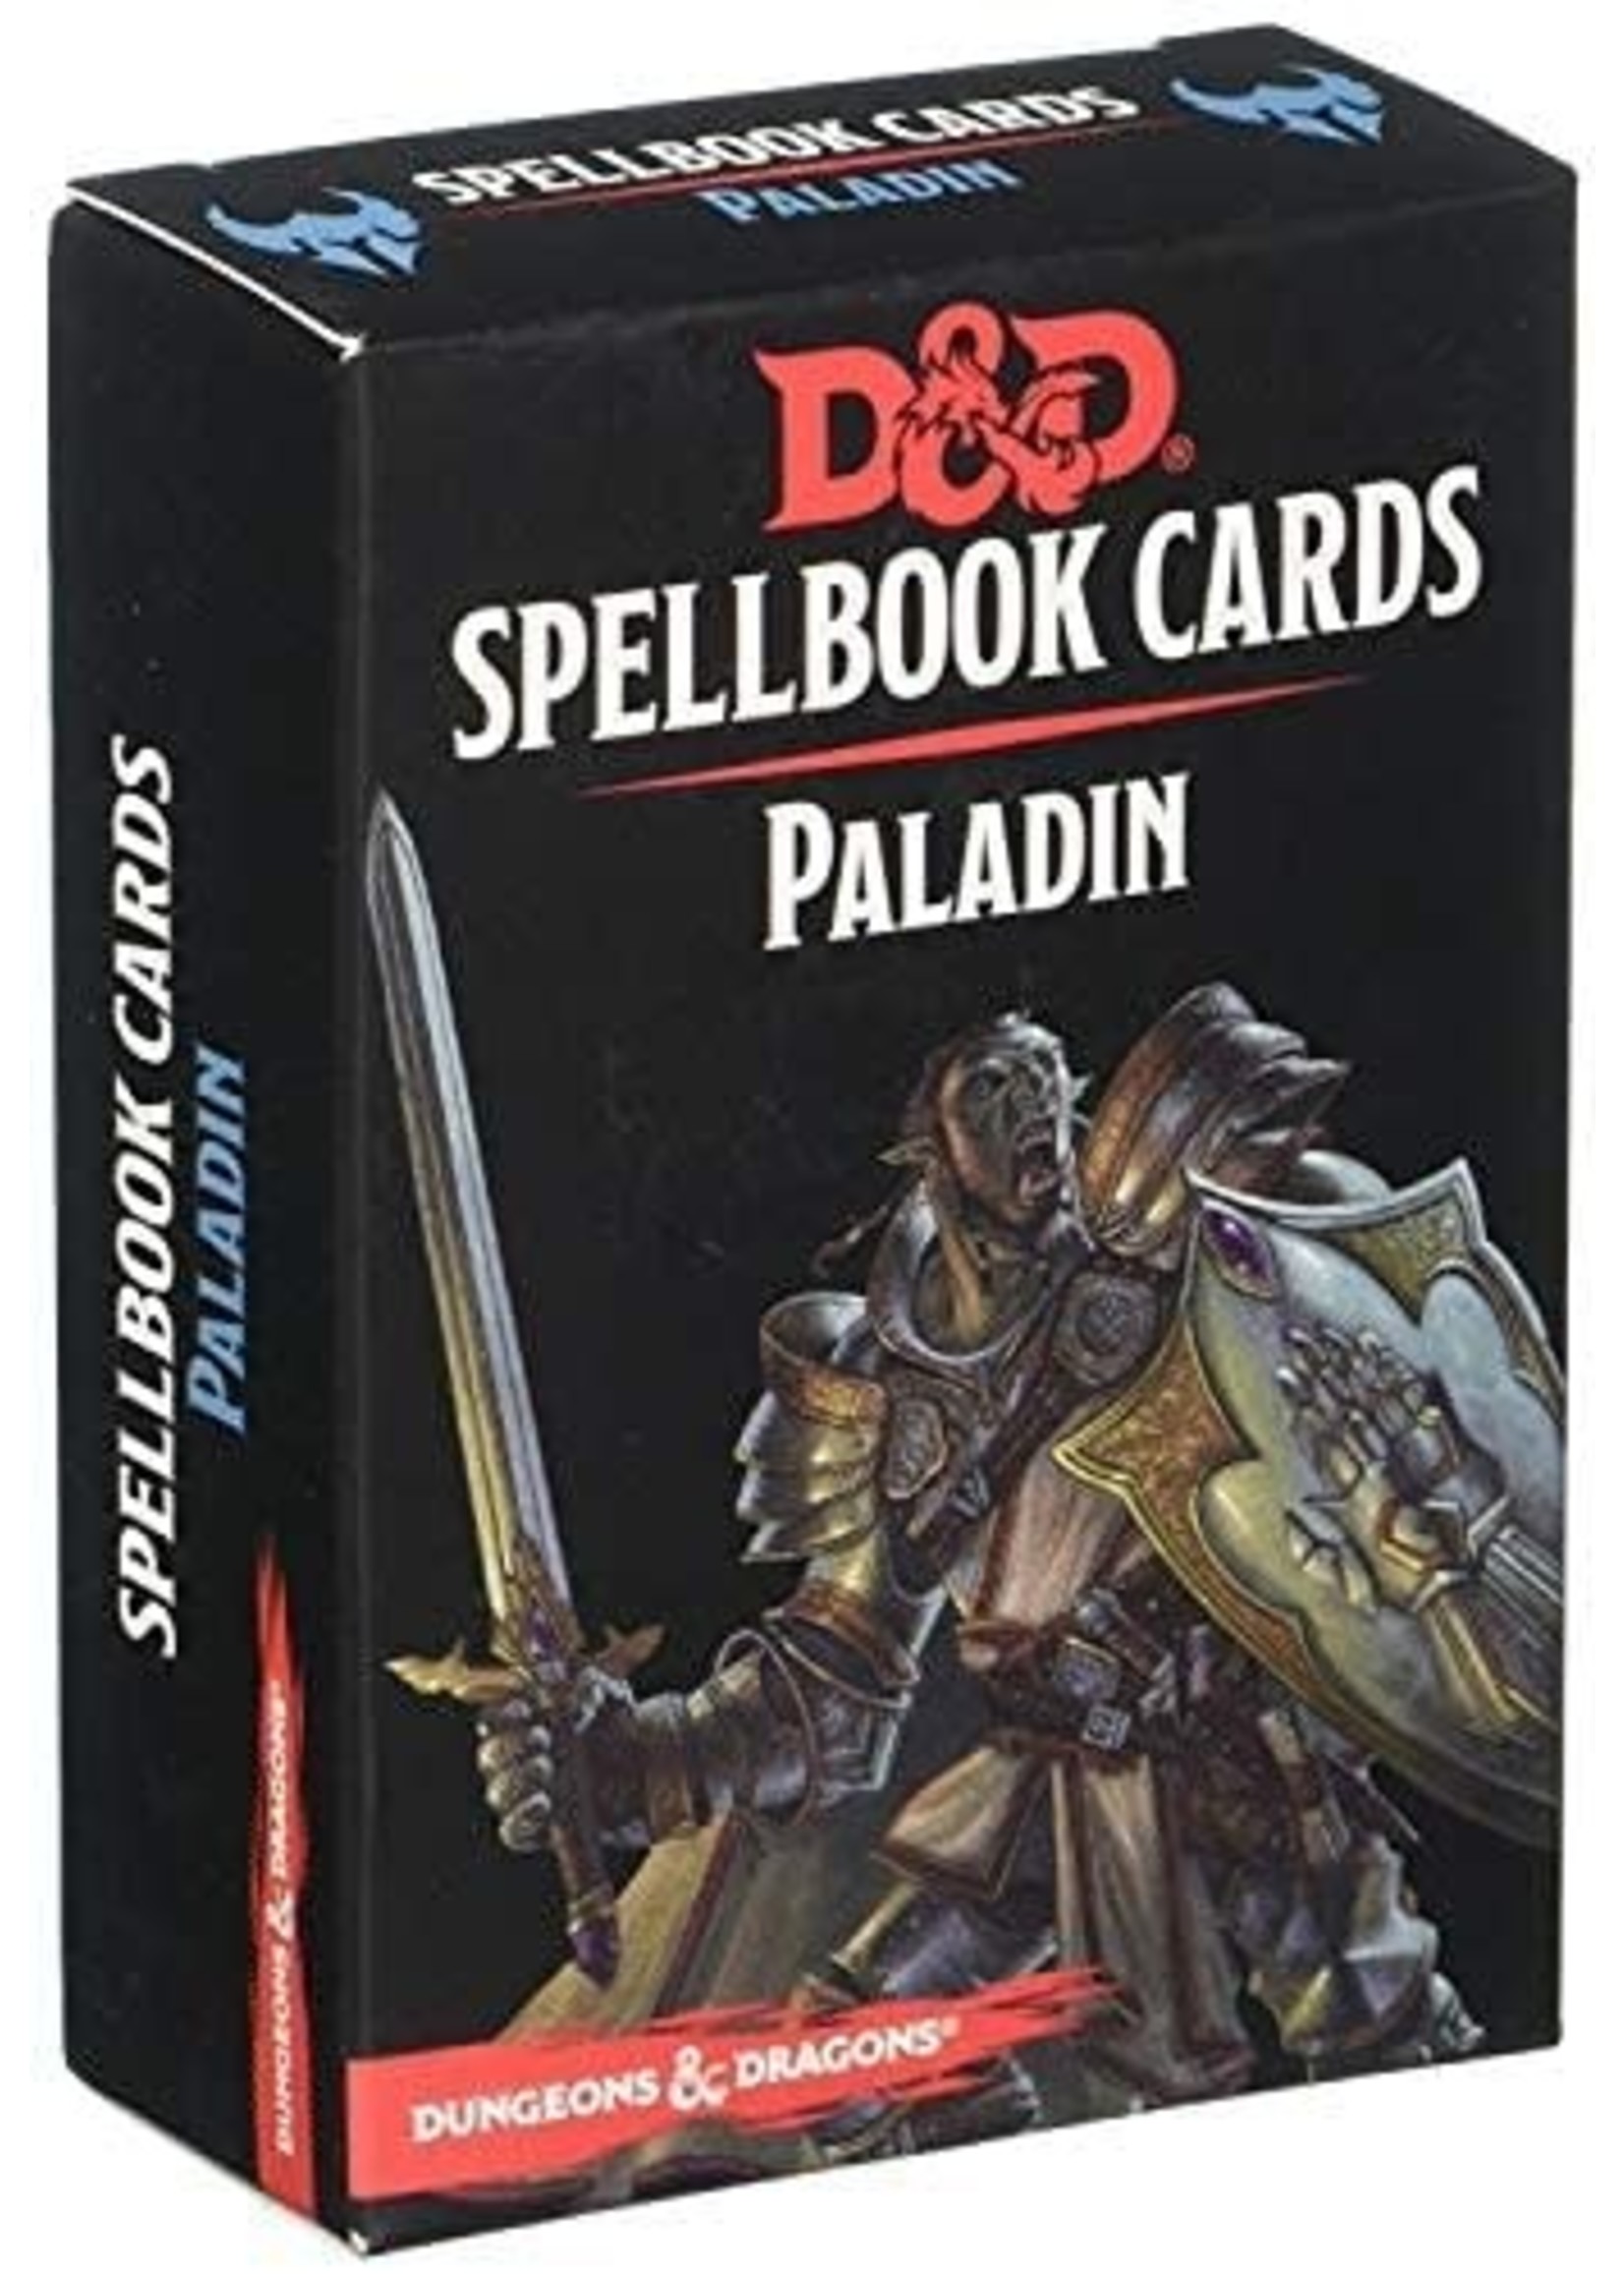 Dungeons & Dragons D&D - Spellbook card - Paladin